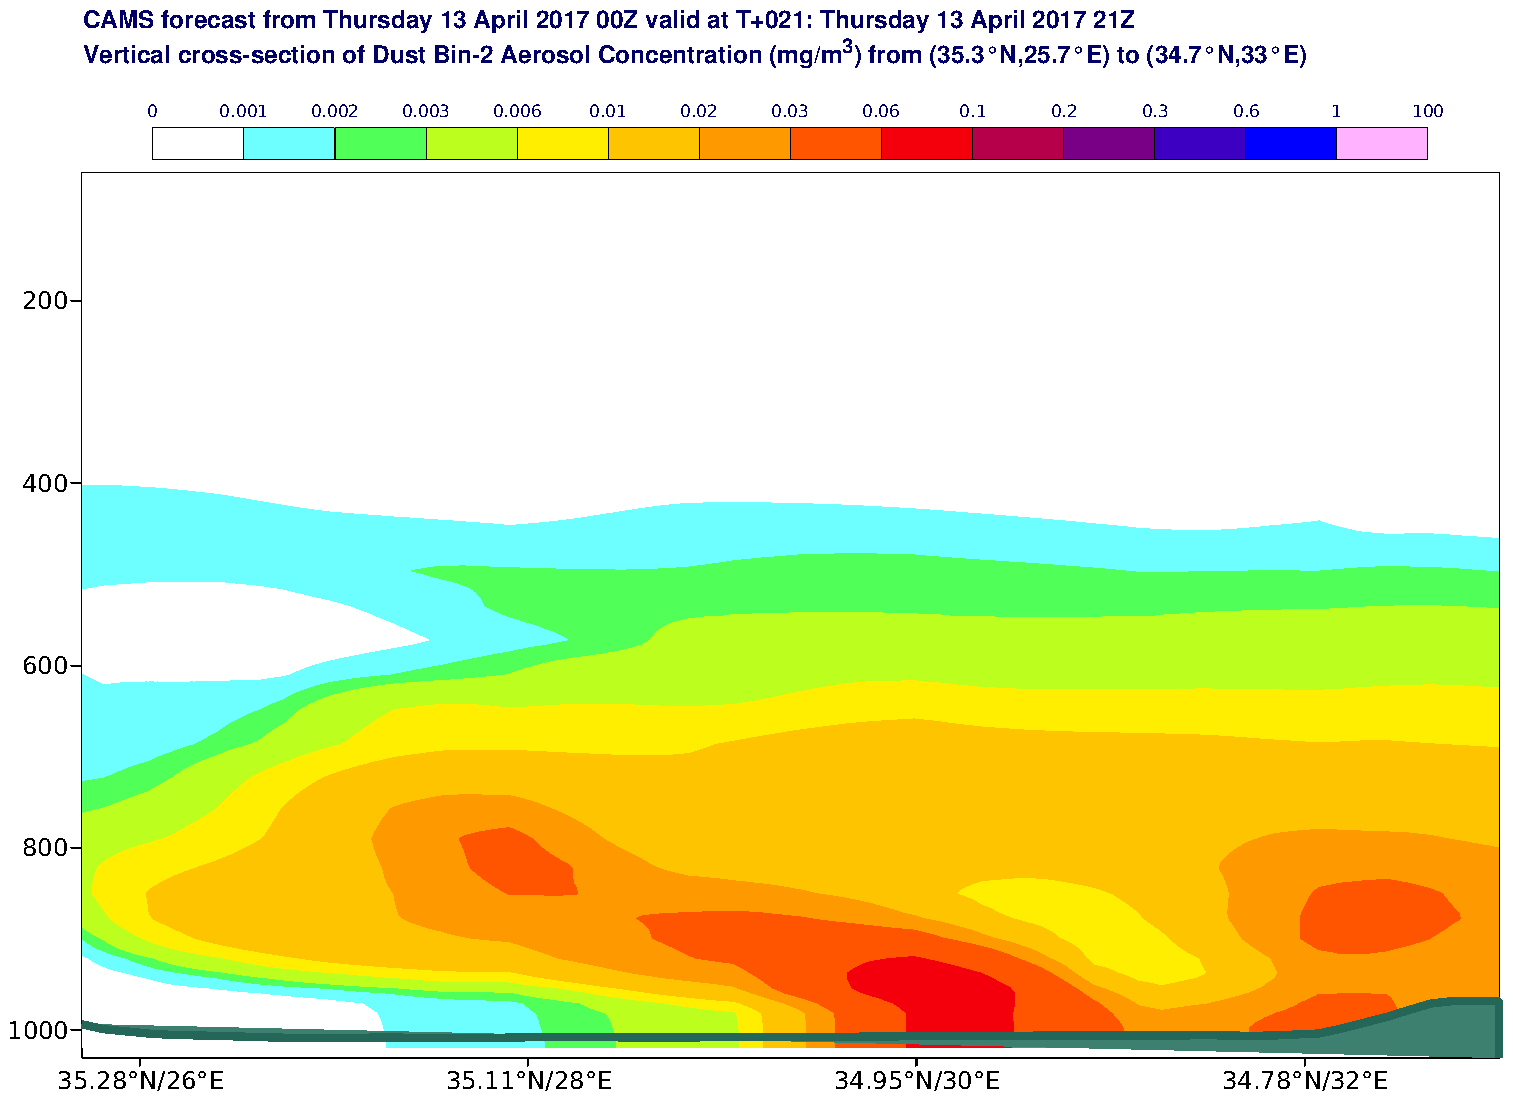 Vertical cross-section of Dust Bin-2 Aerosol Concentration (mg/m3) valid at T21 - 2017-04-13 21:00